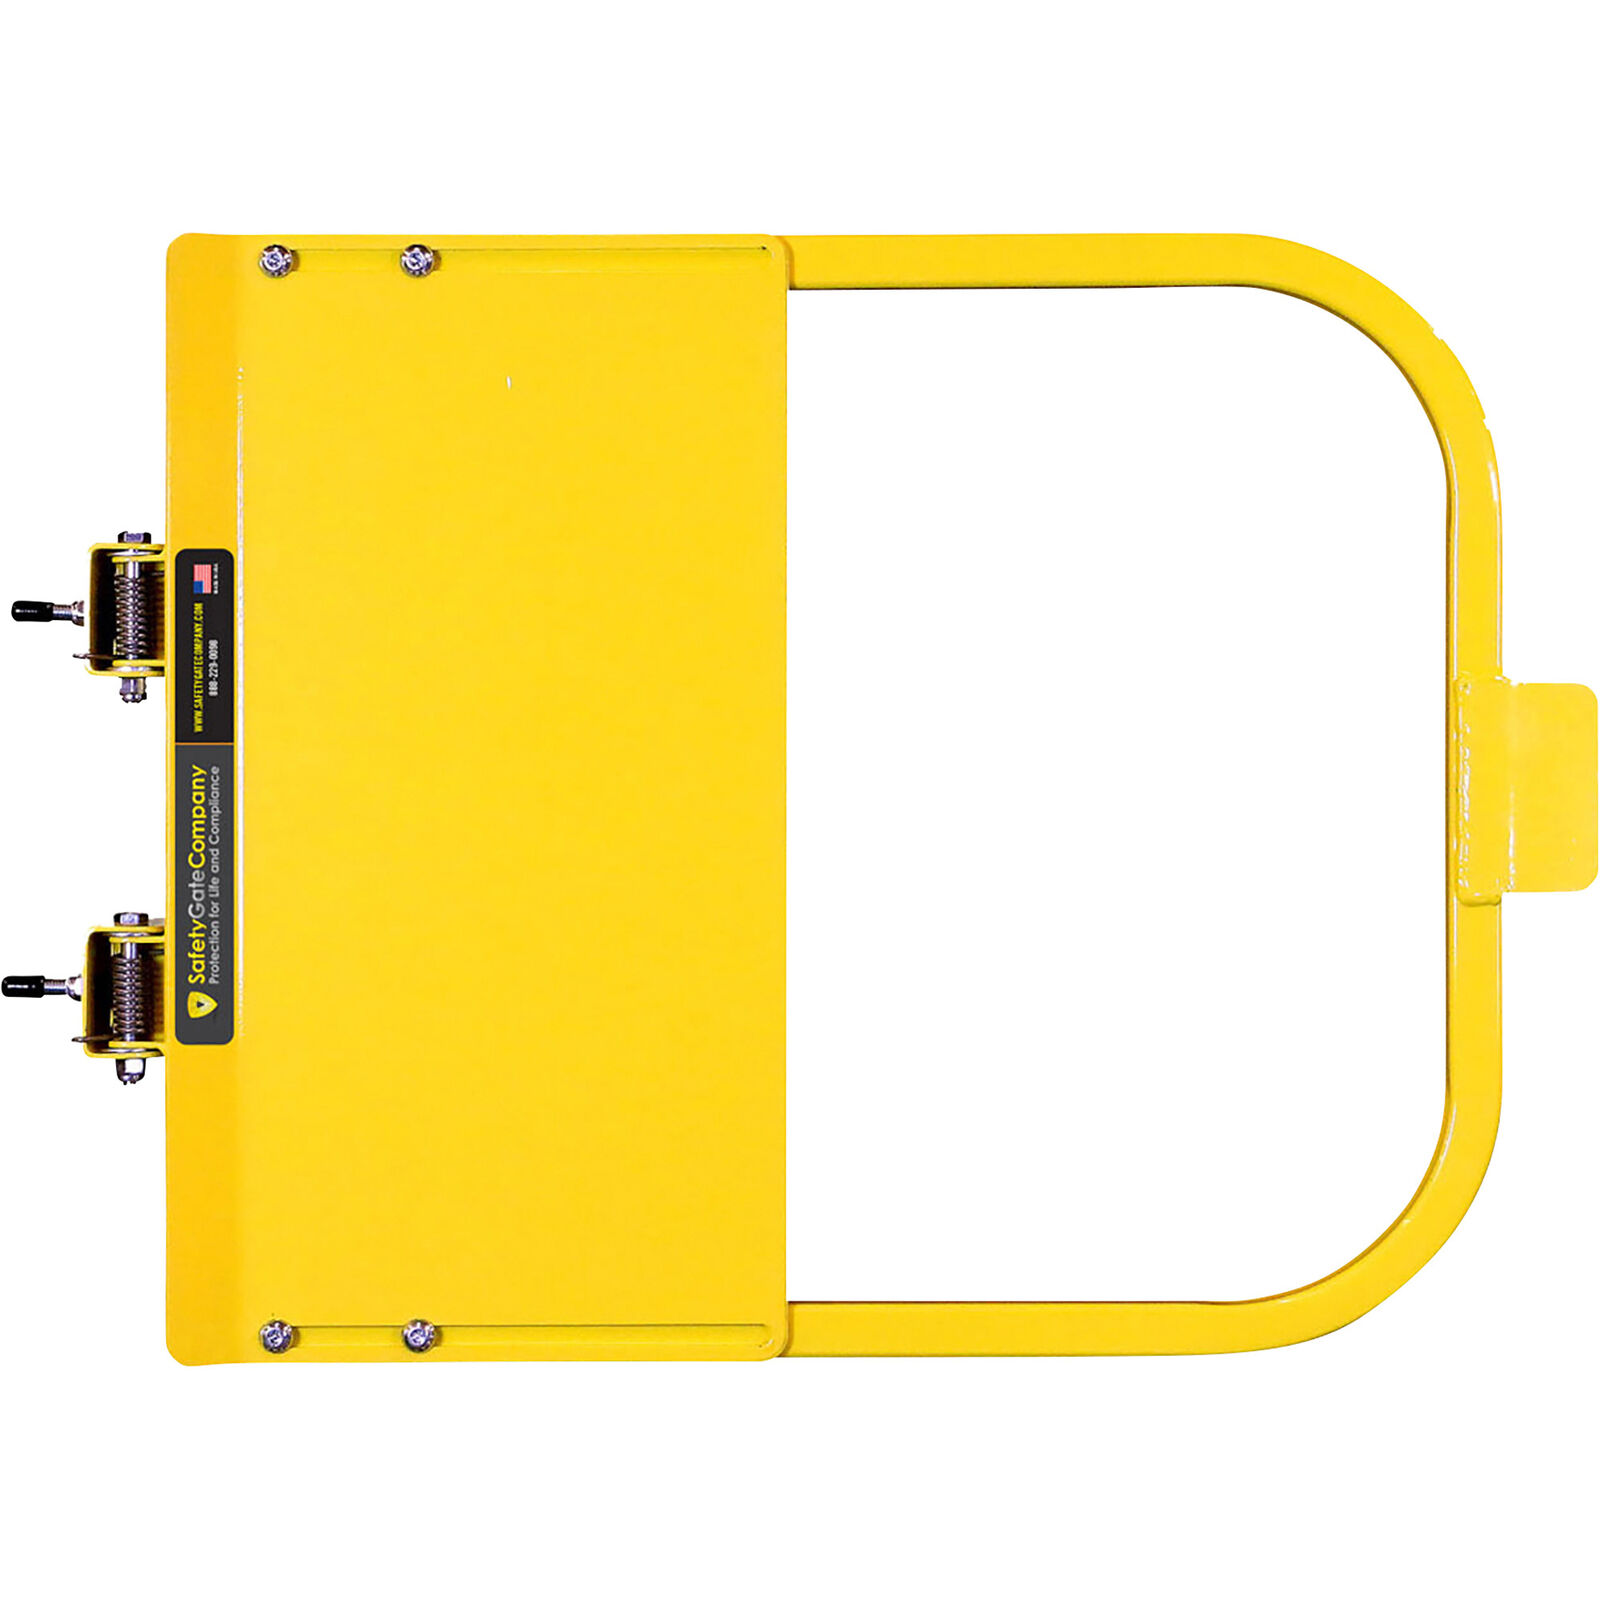 Safety Rail Company Self-Closing Gate - Yellow, 19in.L x 21in.H Model# 400229